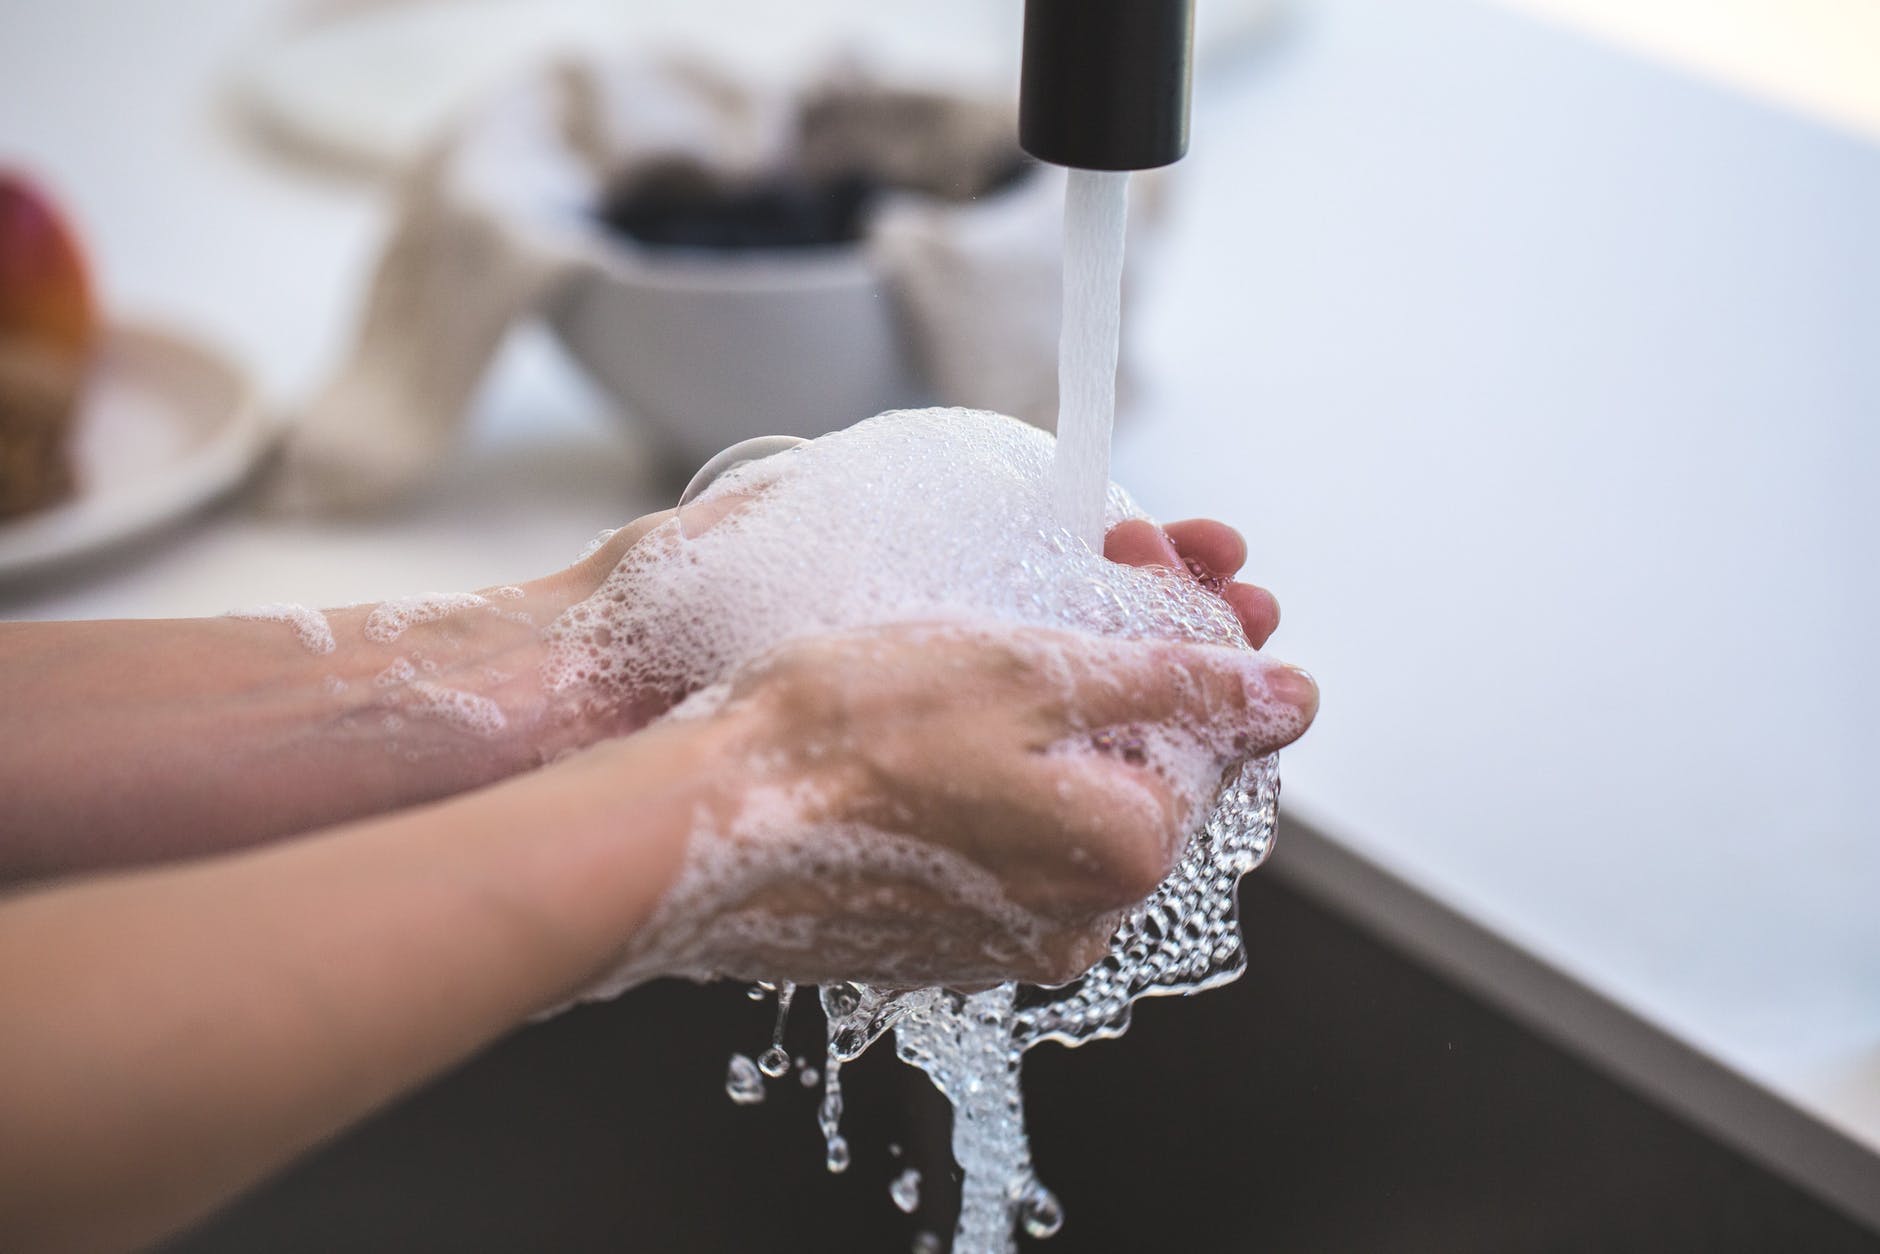 close-up of person washing hands in kitchen sink